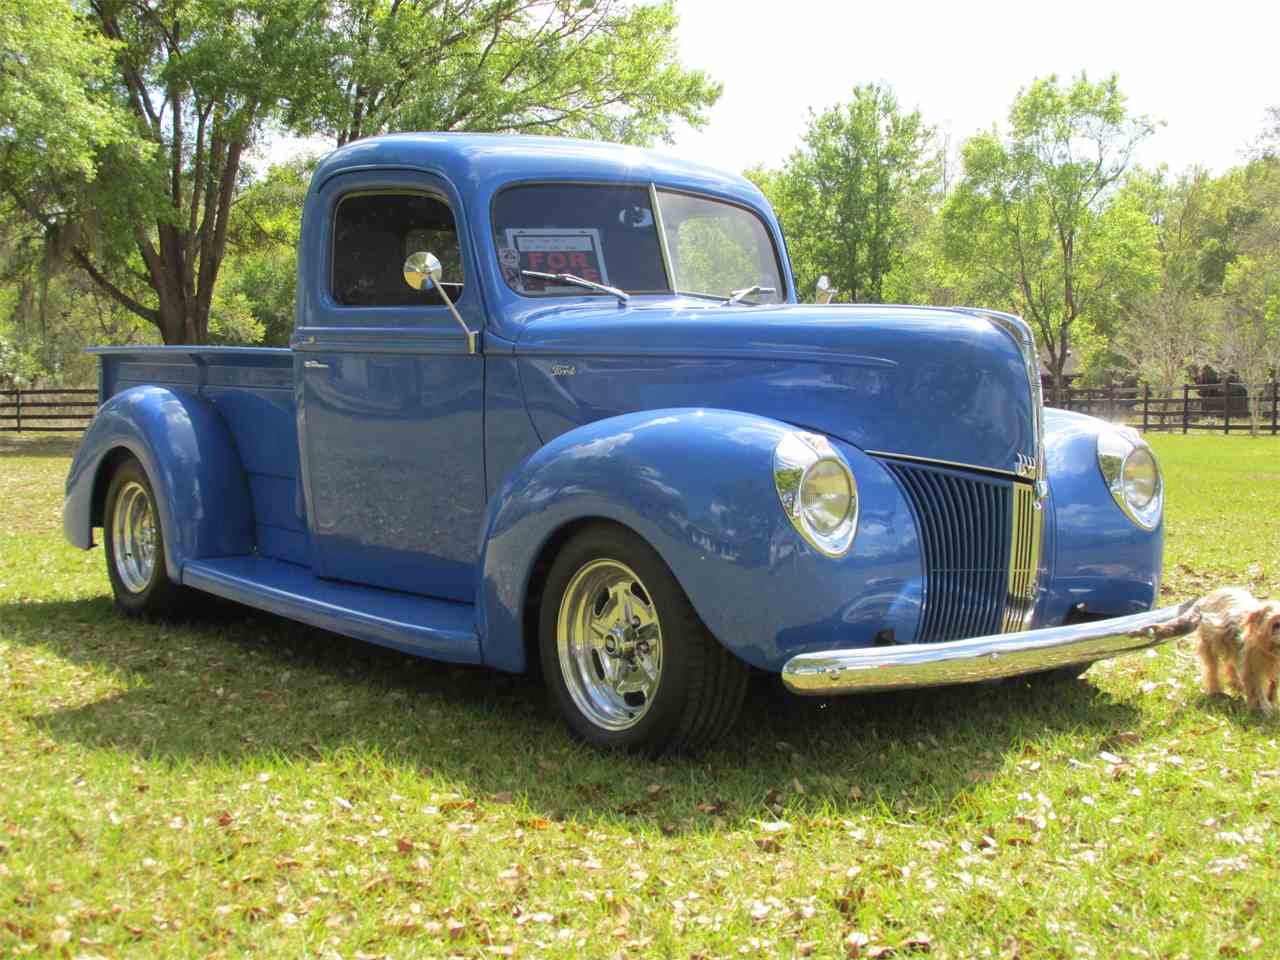 1940 Ford Pickup for Sale | ClassicCars.com | CC-964802